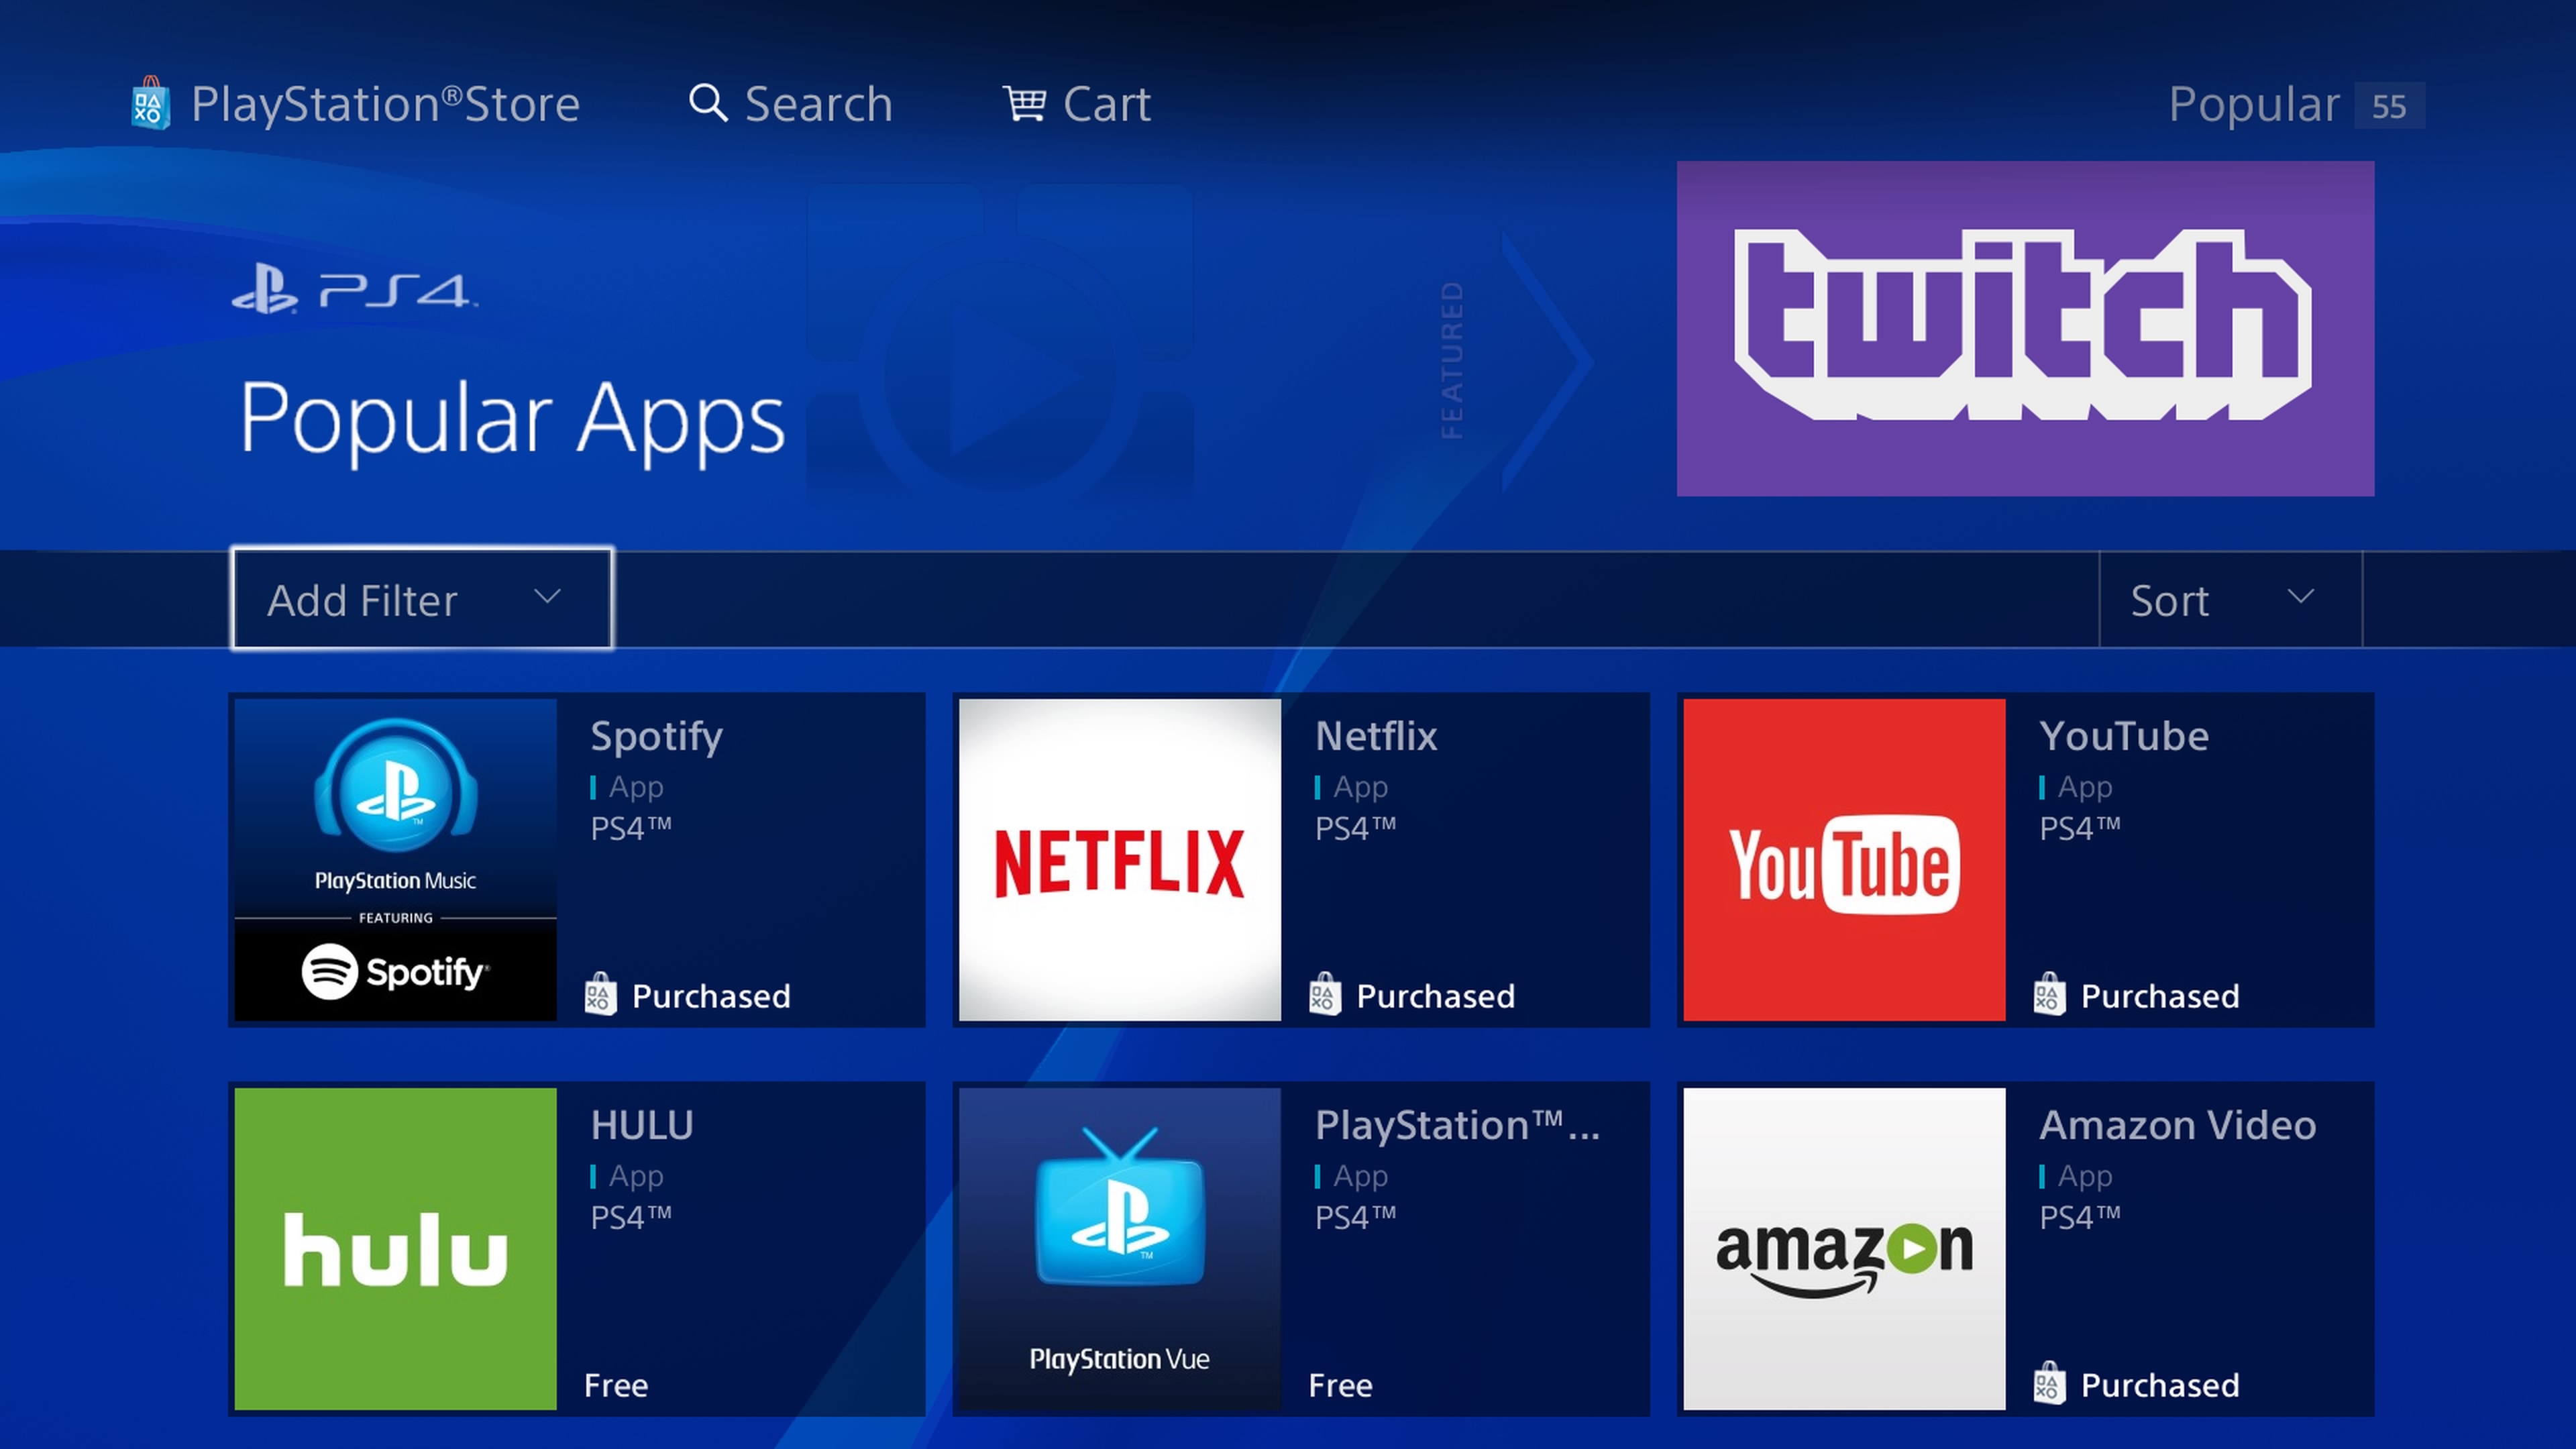 Best PS4 apps: 15 PS4 apps you need to download - Tech News Log